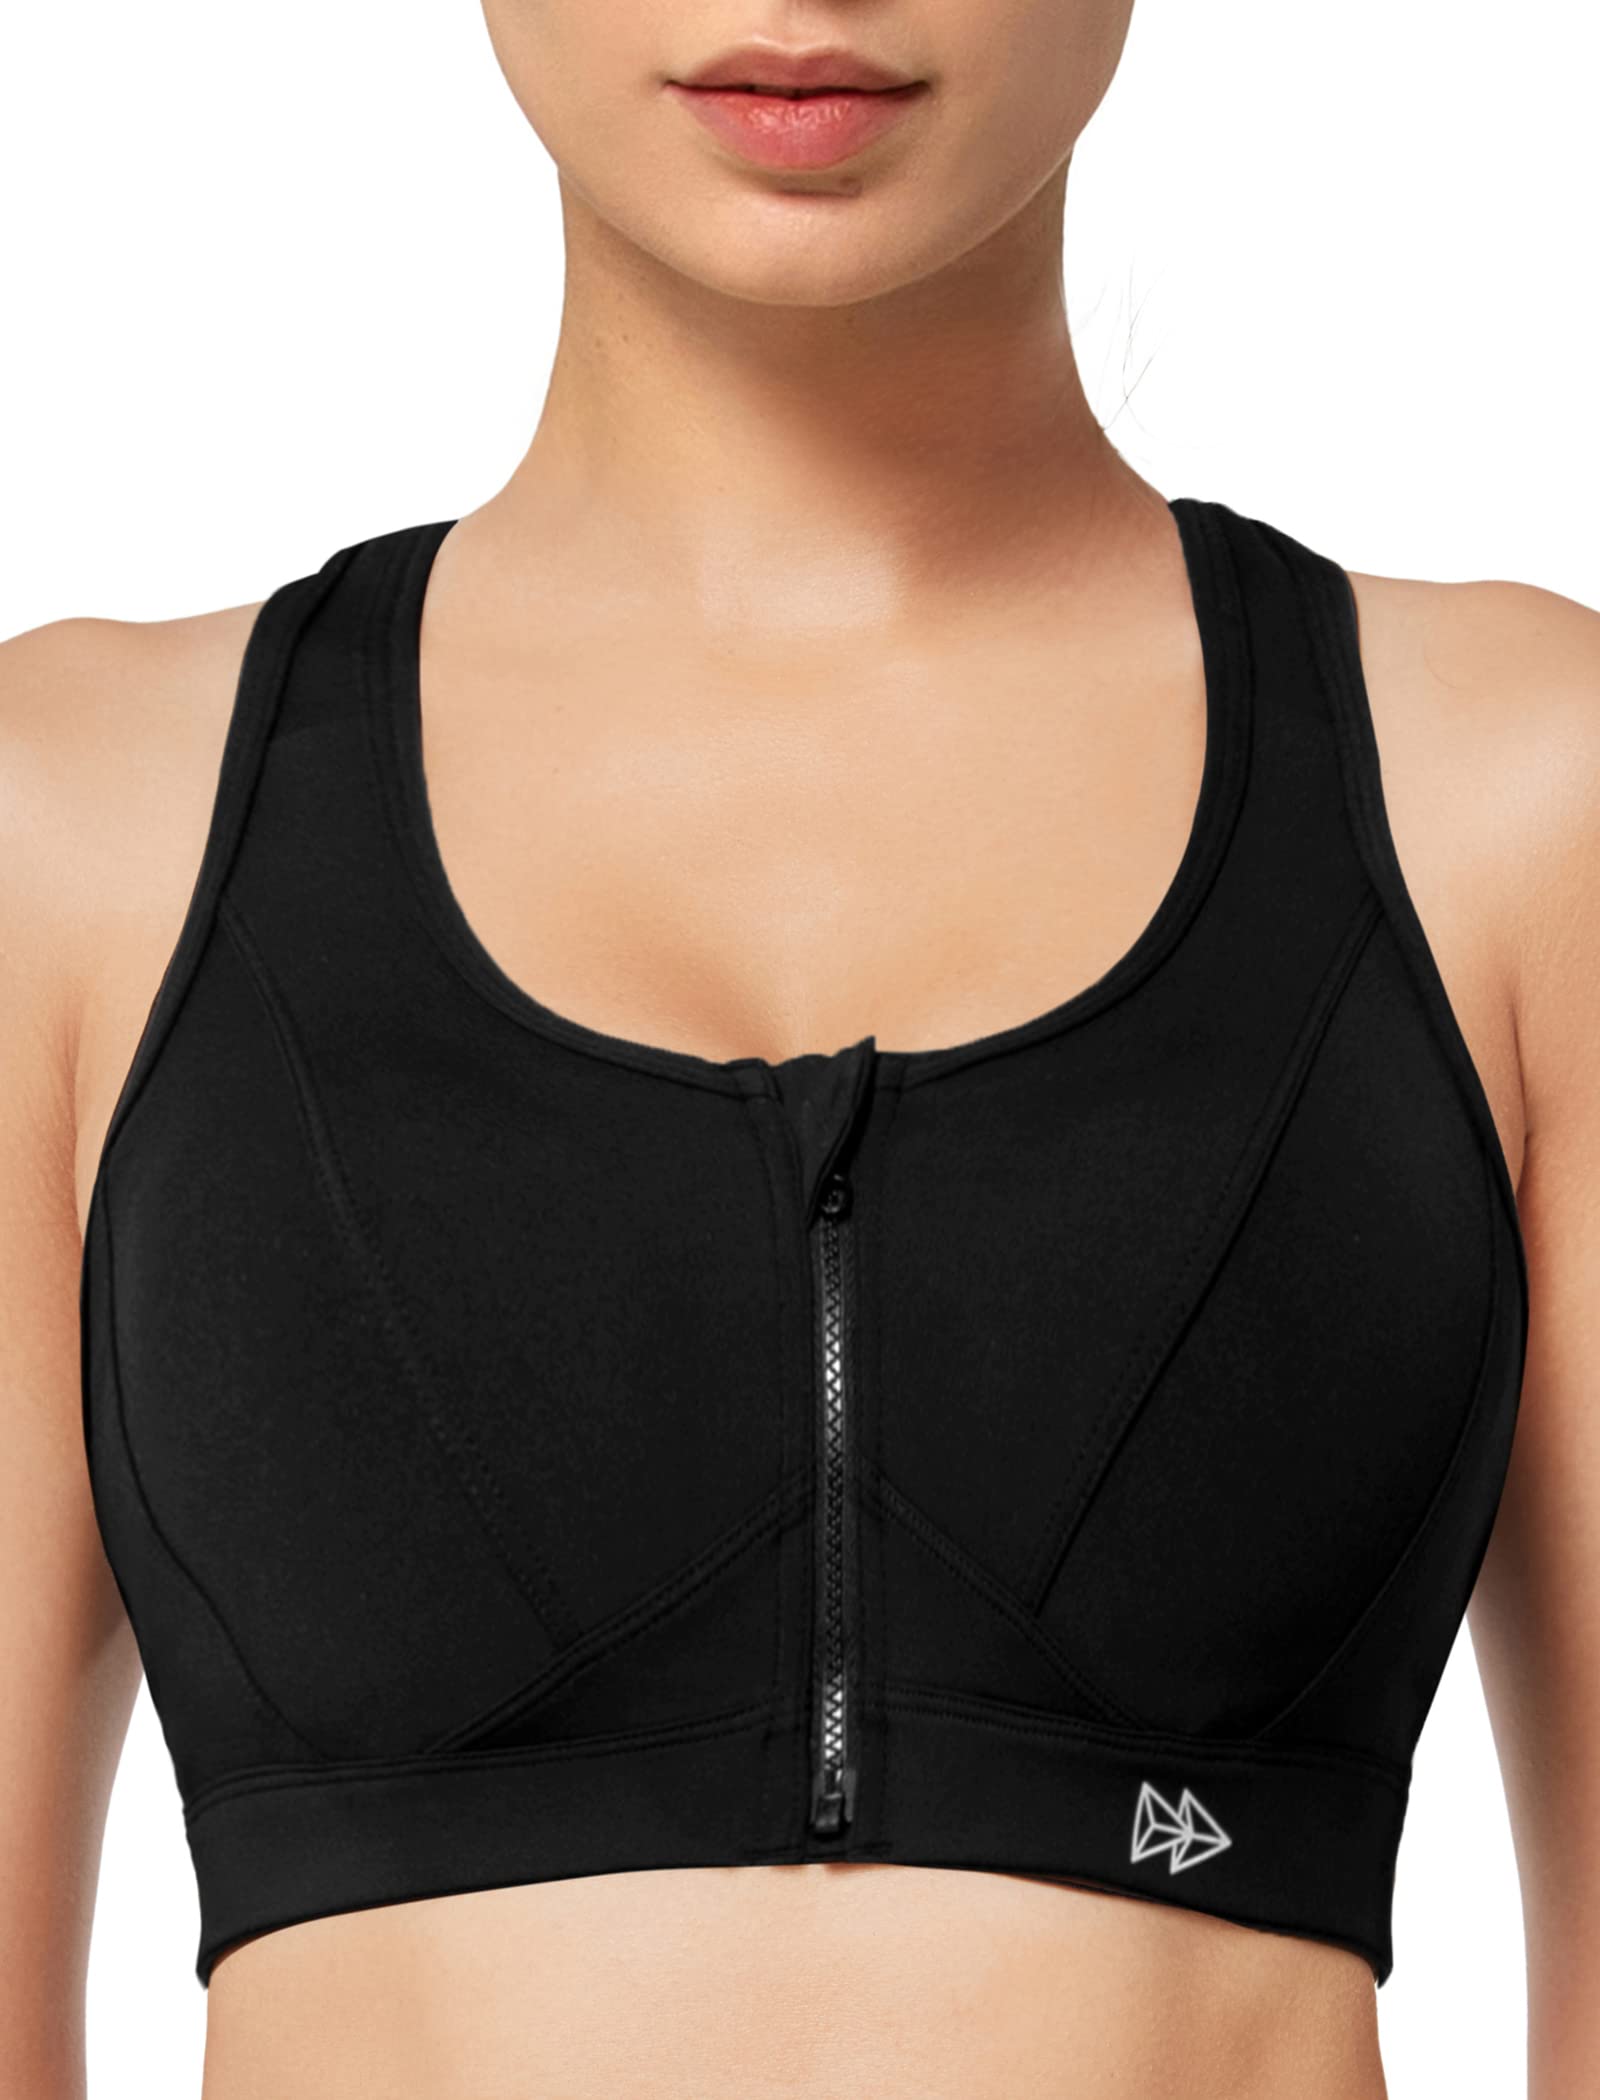 High Impact Sports Bras for Running and Training